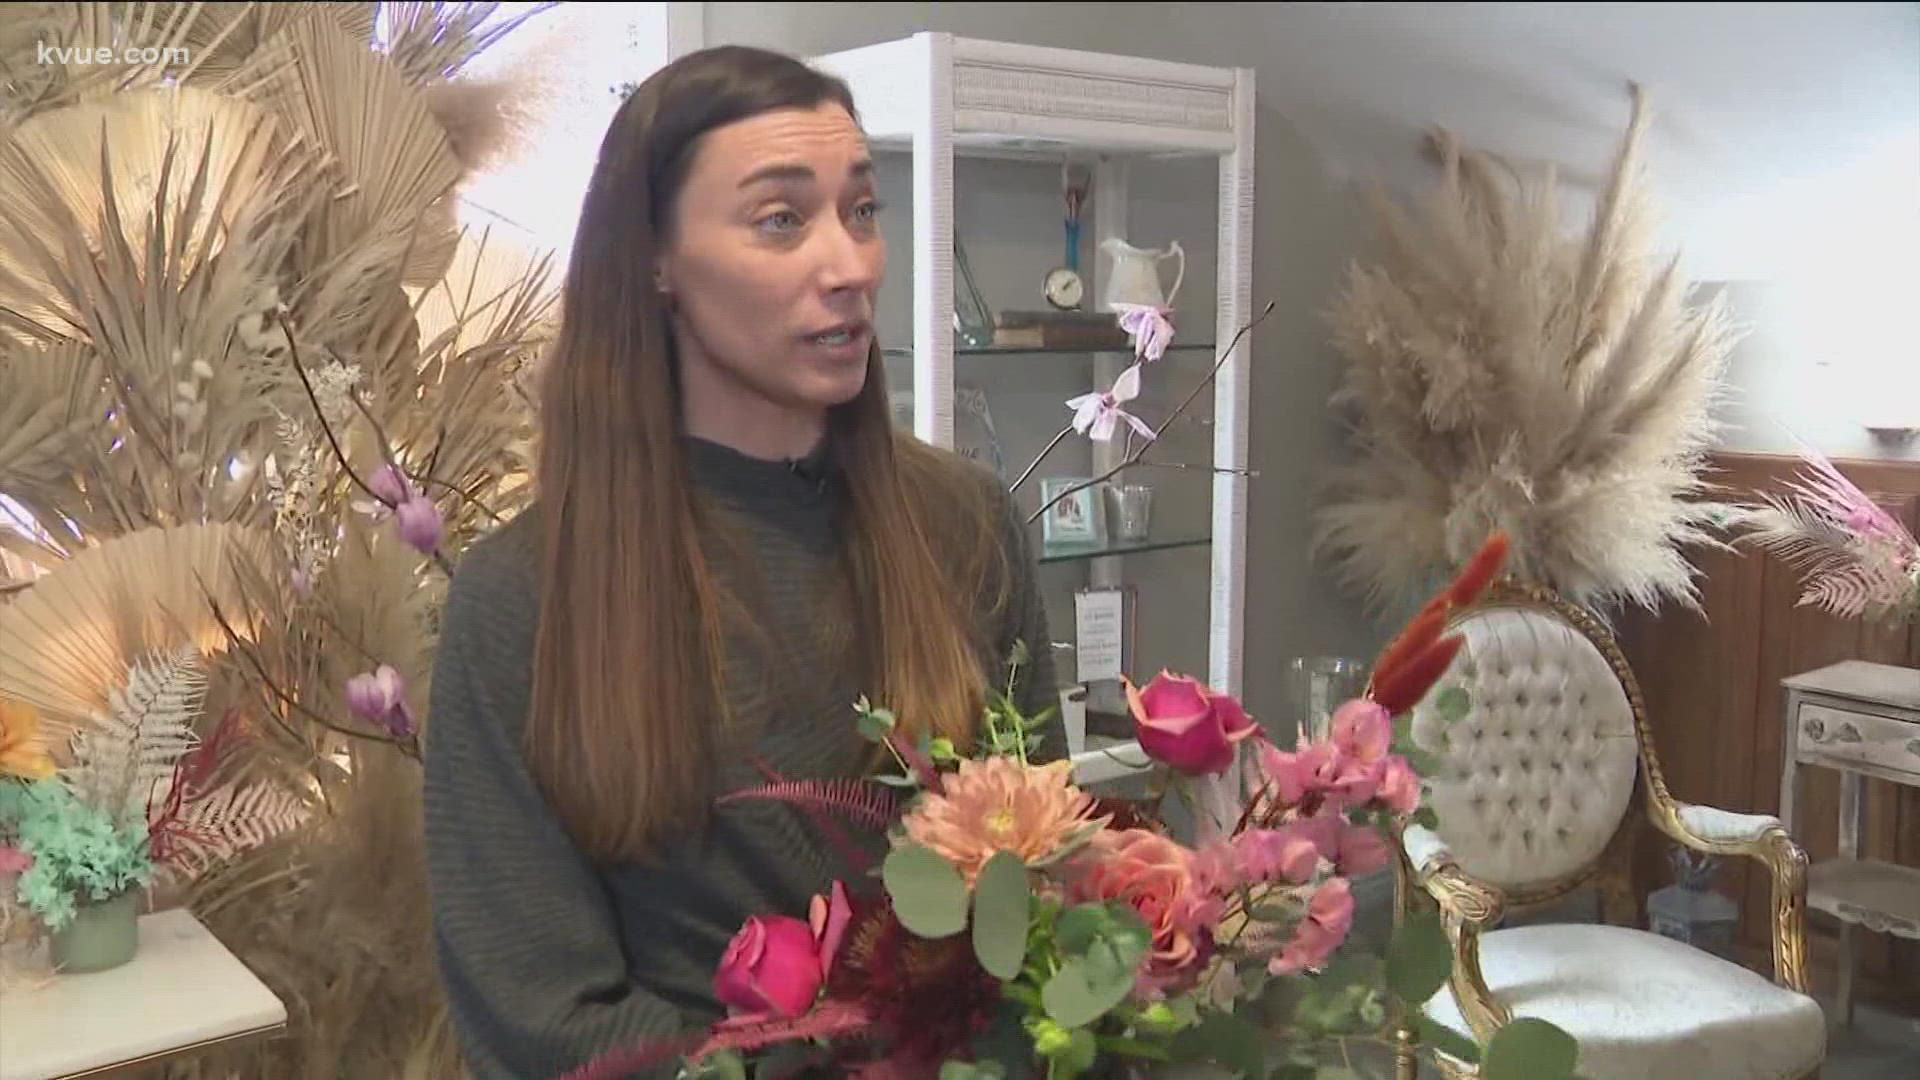 Check out the beautiful floral arrangements made by this family-owned business!